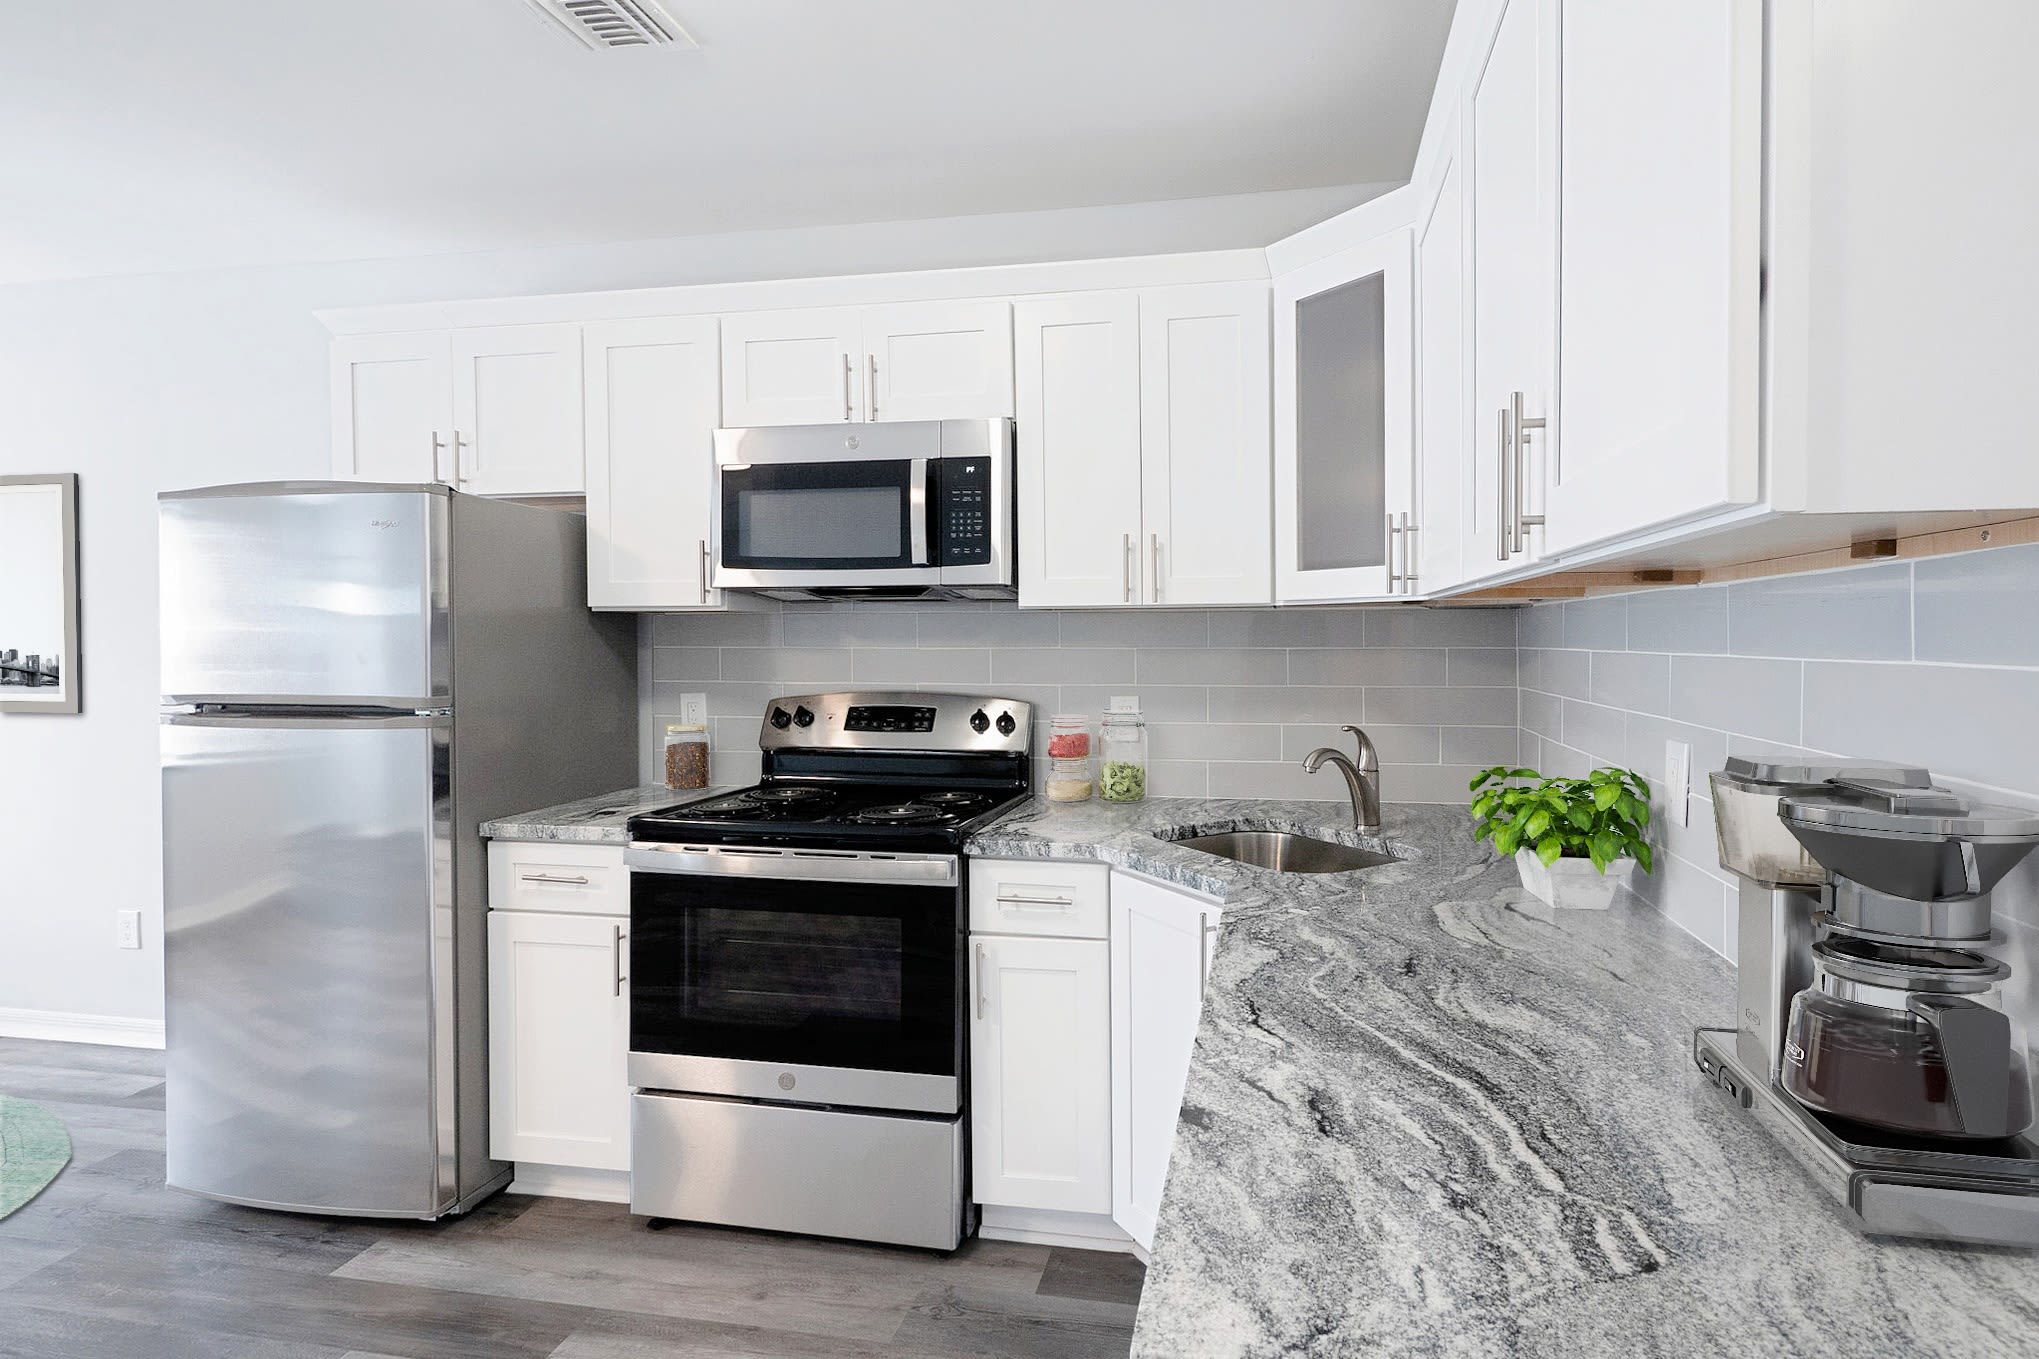 Kitchen with modern appliances at Bunt Commons II in Copiague, New York